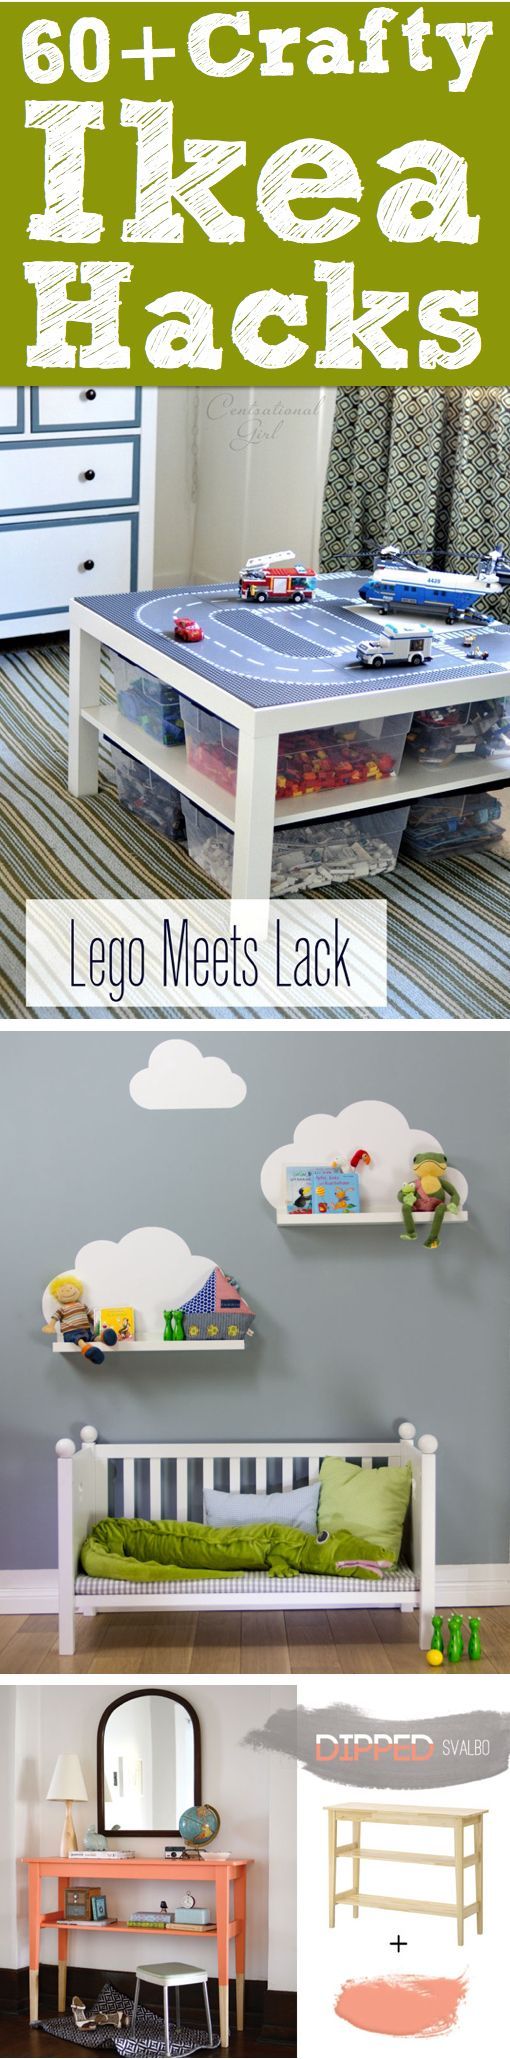 60+ Crafty Ikea Hacks To Help You Save Time And Money!